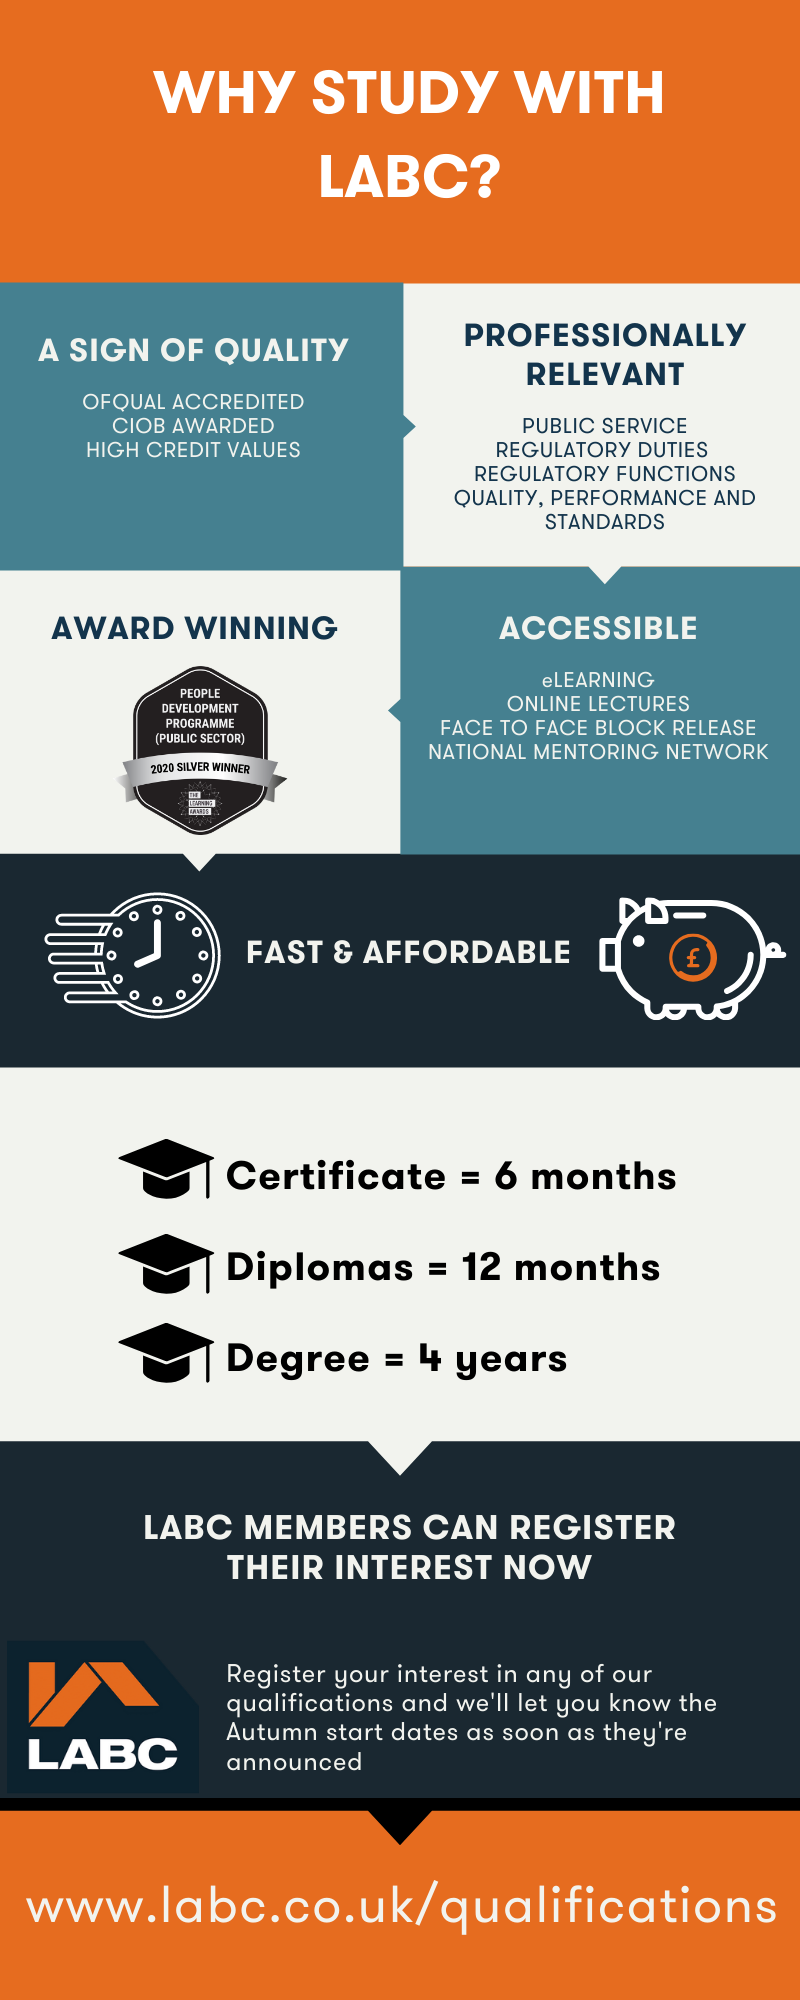 Why study with LABC infographic